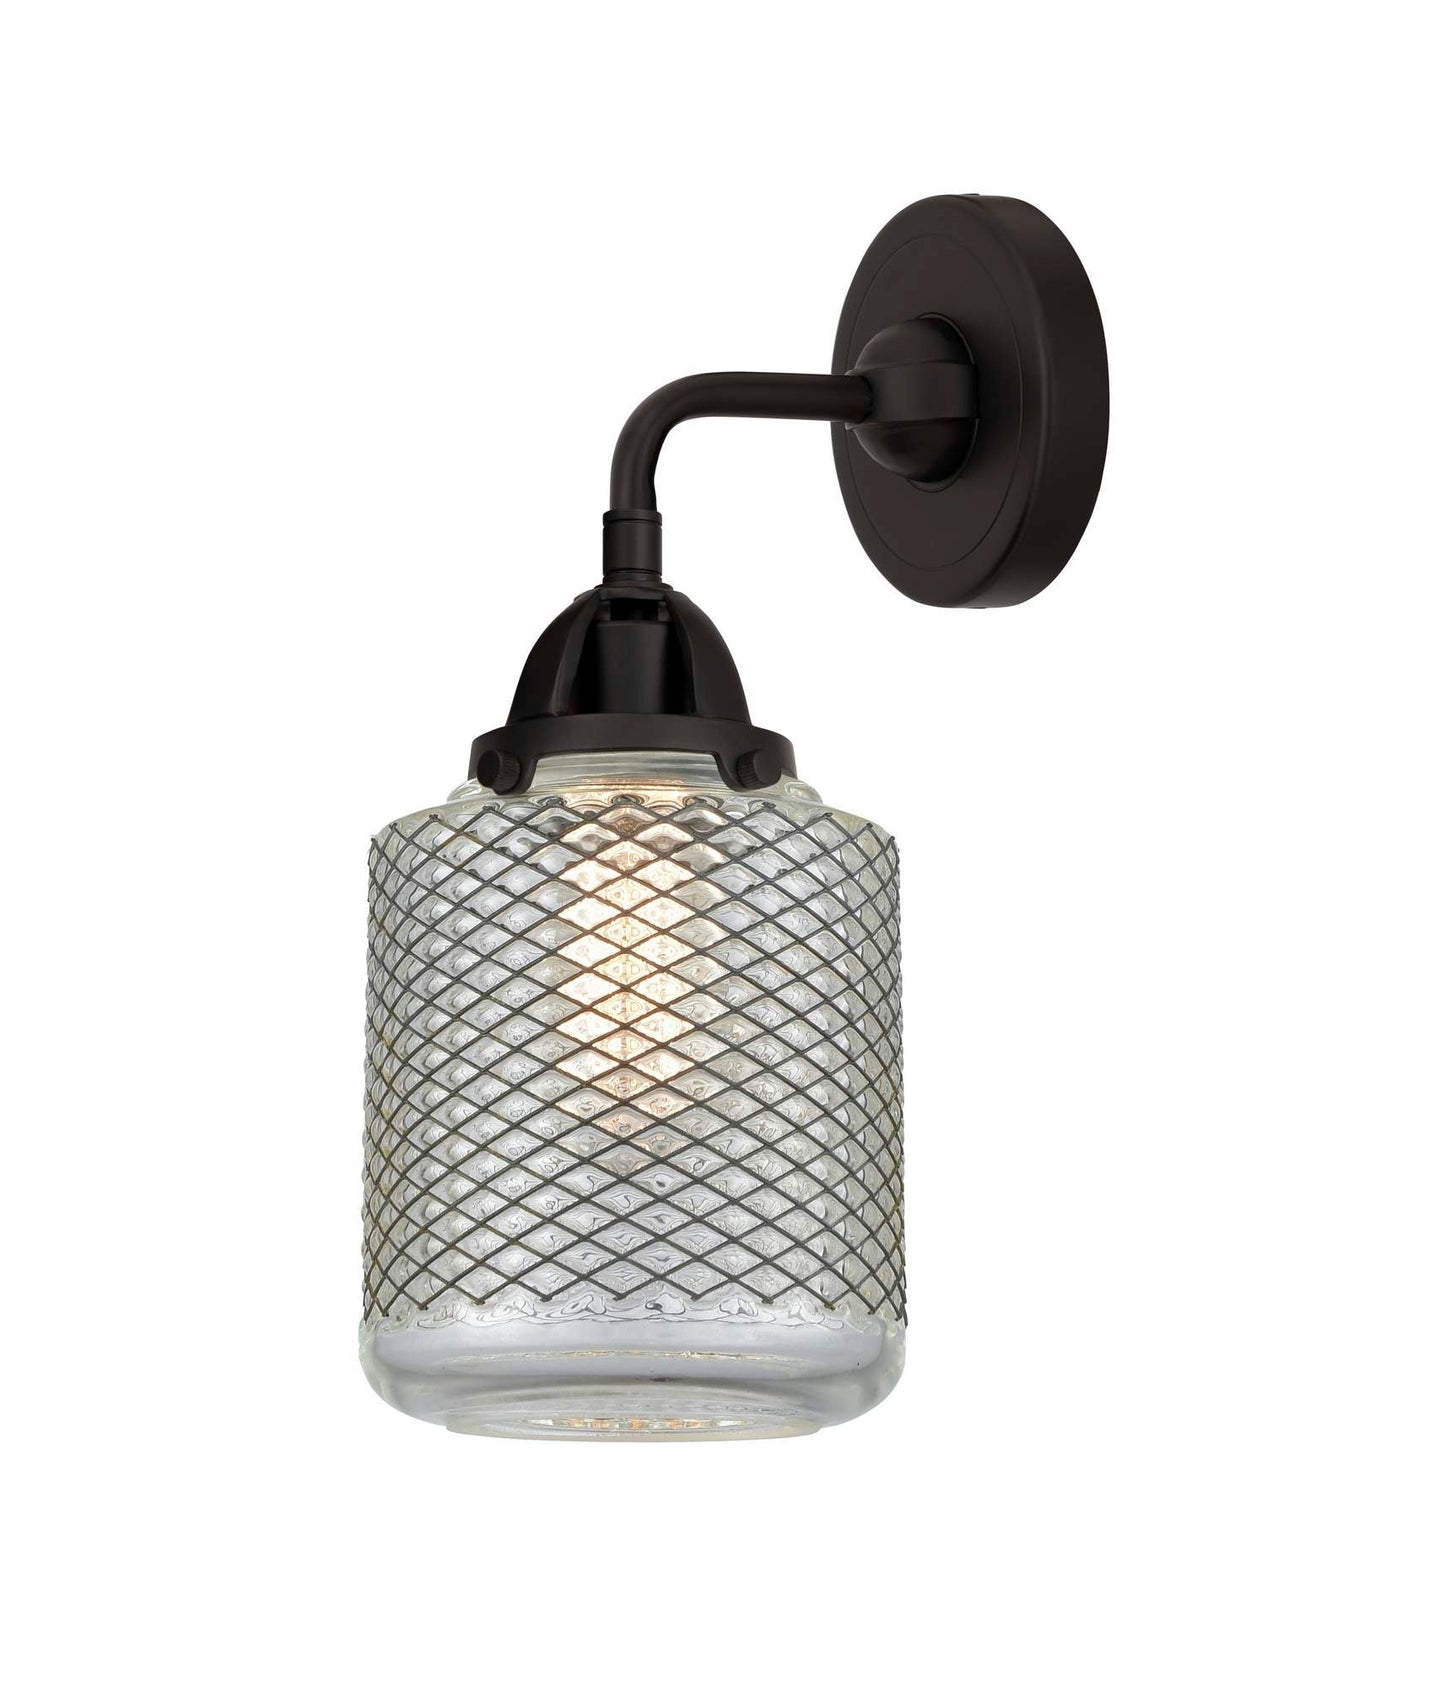 288-1W-BK-G262 1-Light 6" Matte Black Sconce - Vintage Wire Mesh Stanton Glass - LED Bulb - Dimmensions: 6 x 7.25 x 12.125 - Glass Up or Down: Yes